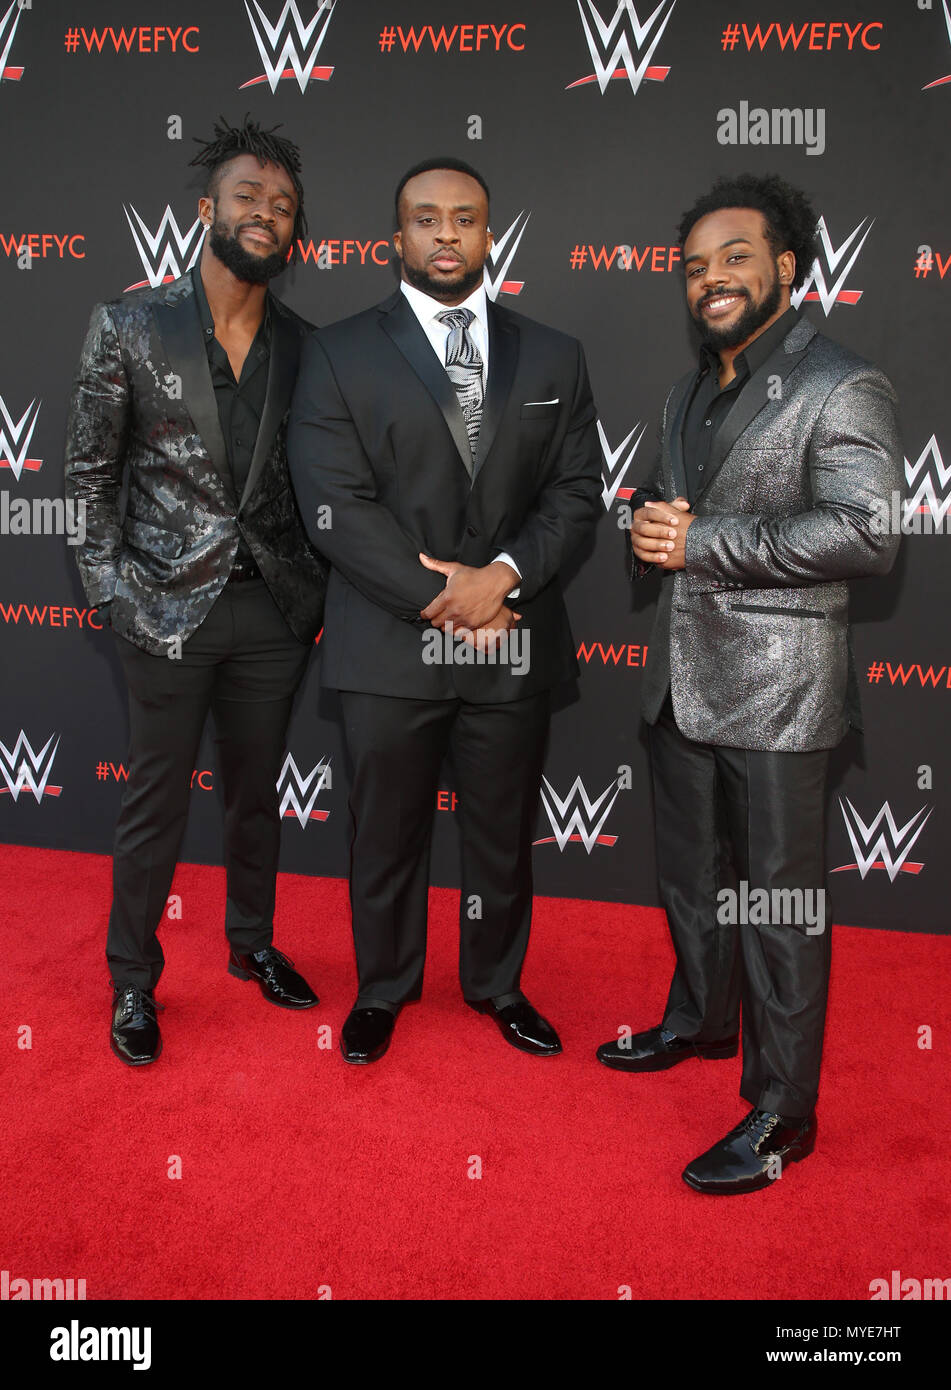 NORTH HOLLYWOOD, CA - JUNE 6: Kofi Kingston, Big E, Xavier Woods,  WWE's First-Ever Emmy 'For Your Consideration' Event at The Saban Media Center in North Hollywood, California on June 6, 2018. Credit: Faye Sadou/MediaPunch Stock Photo